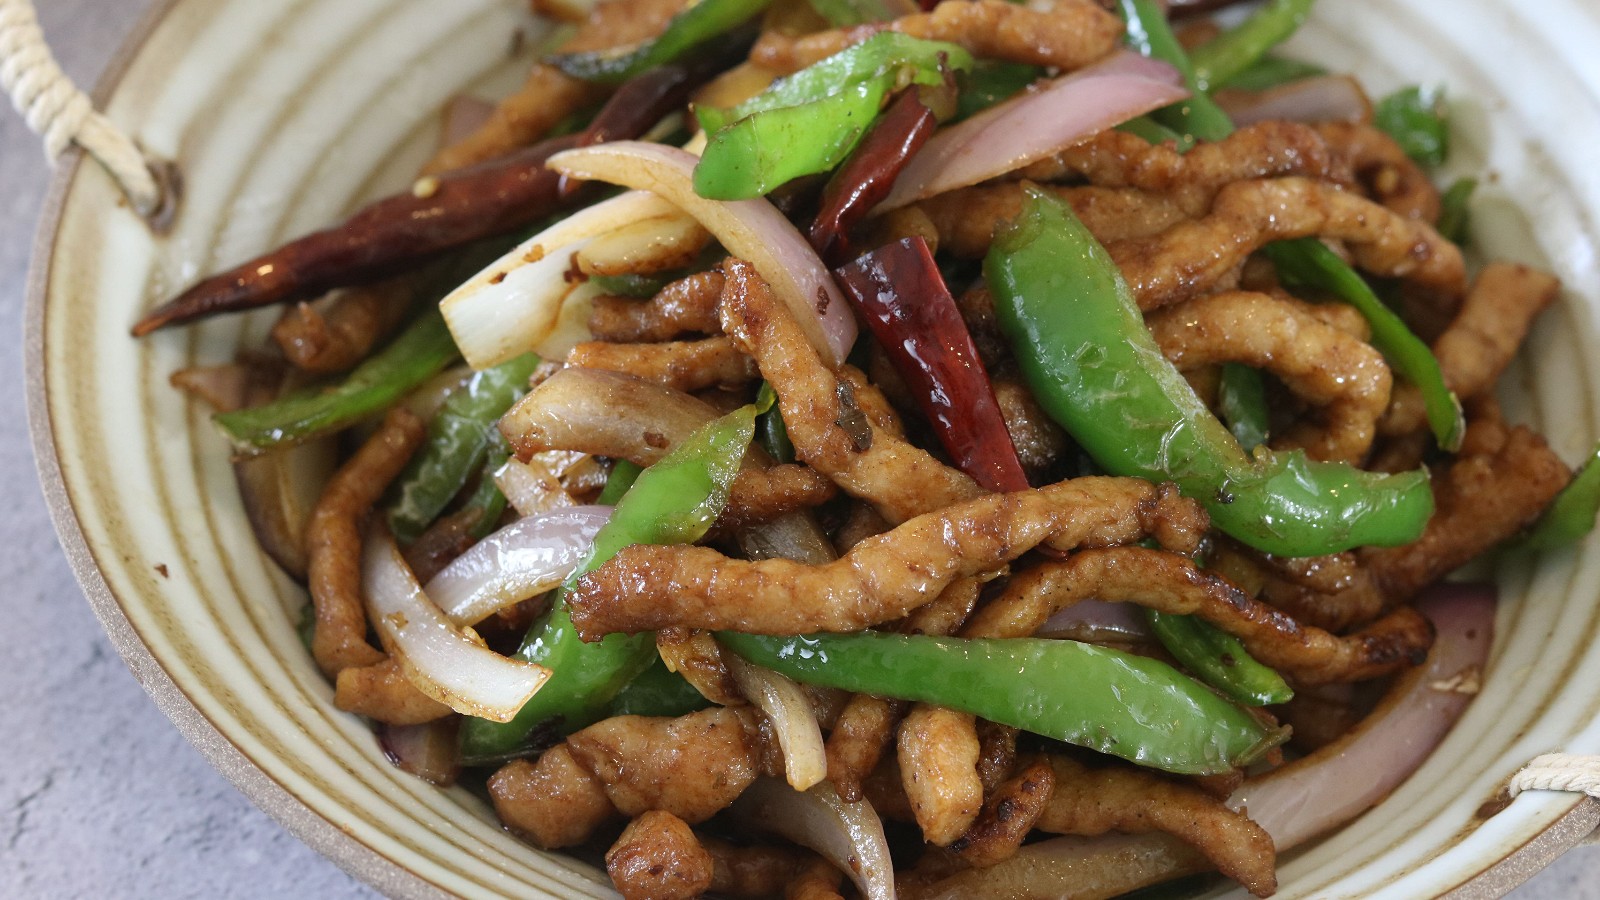 Image of Stir Fry Pork w/ Green Chili Peppers